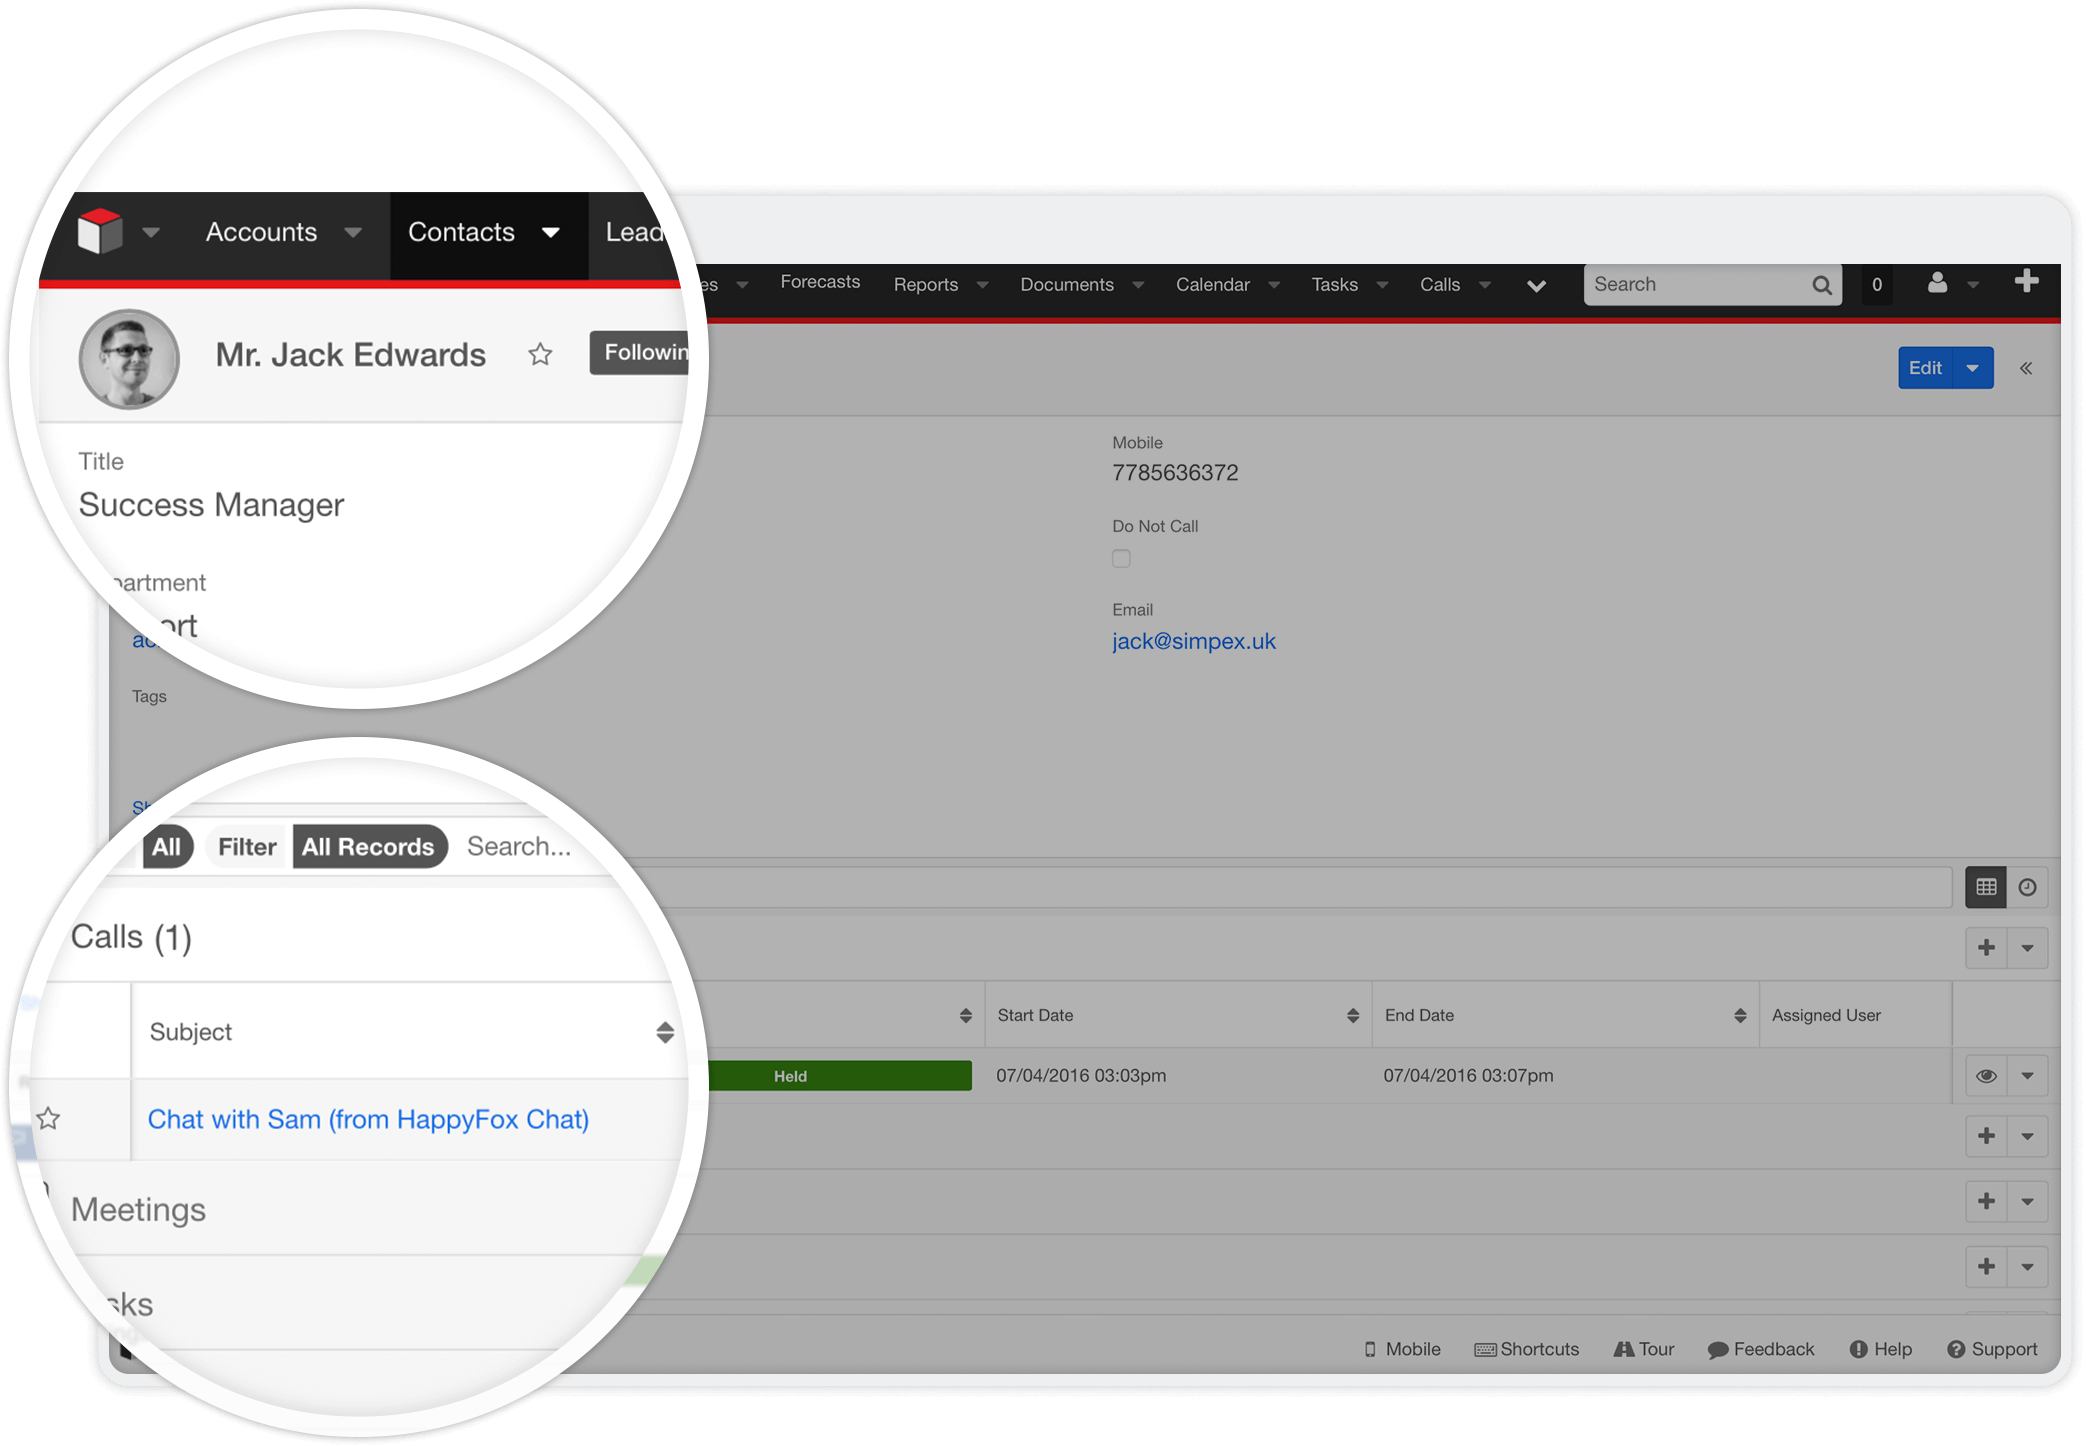 Automatically add contacts or leads in SugarCRM